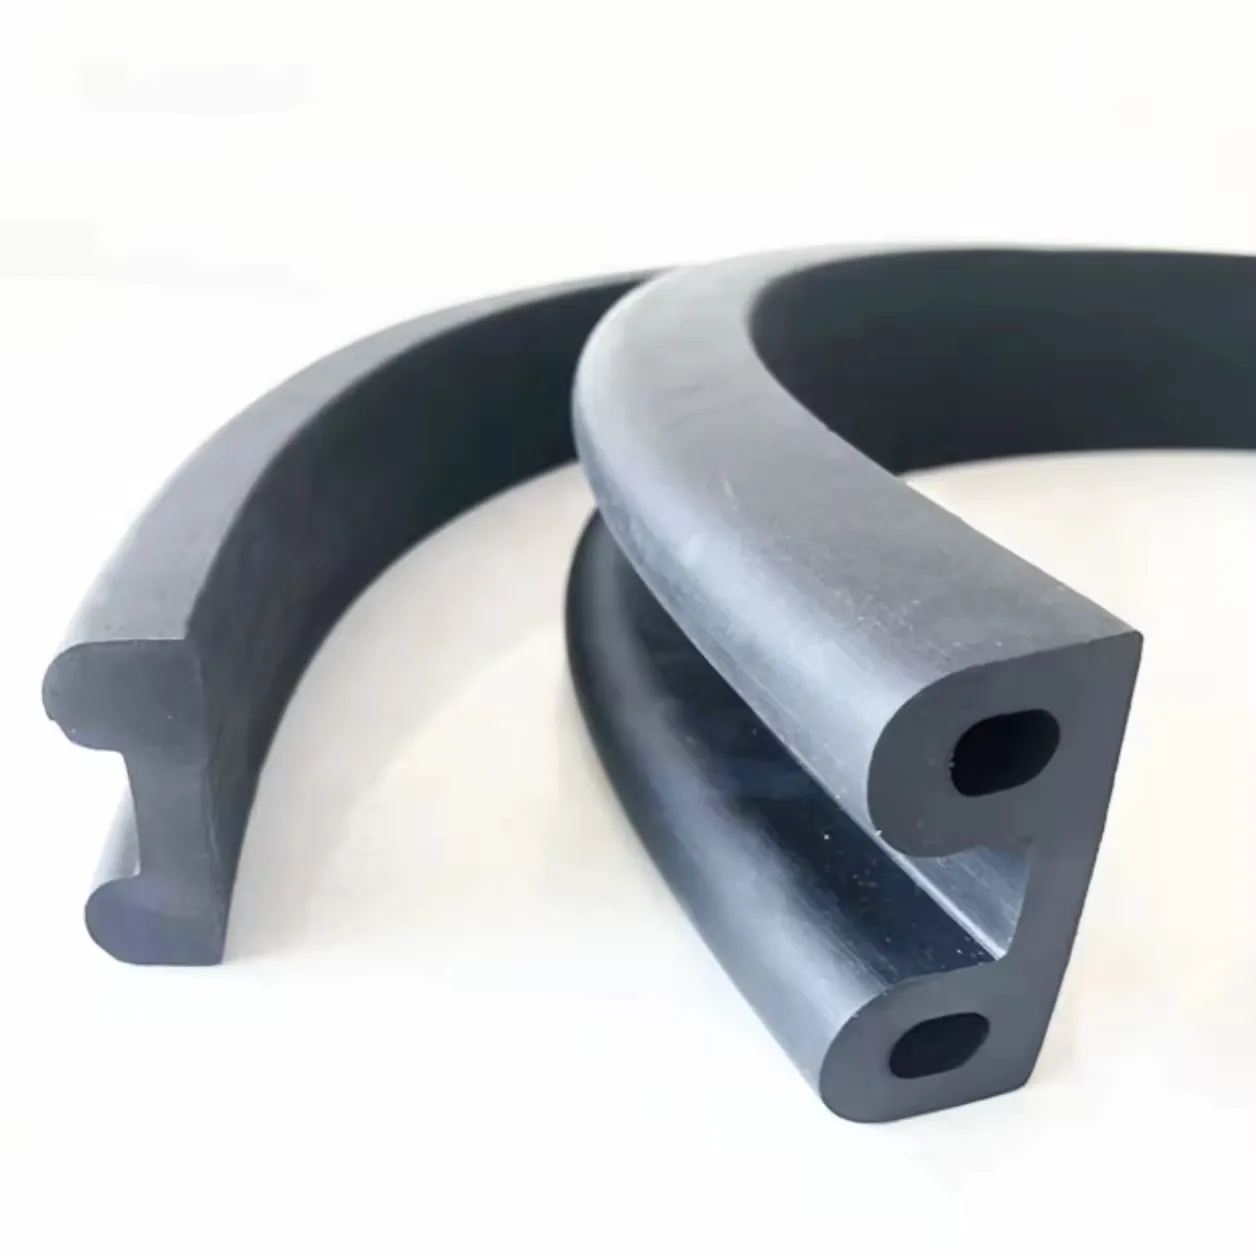 EPDM fender Rubber Customized Extruded Profile rubber sealing strip for aluminum window Boat Marine rubber fender bumper